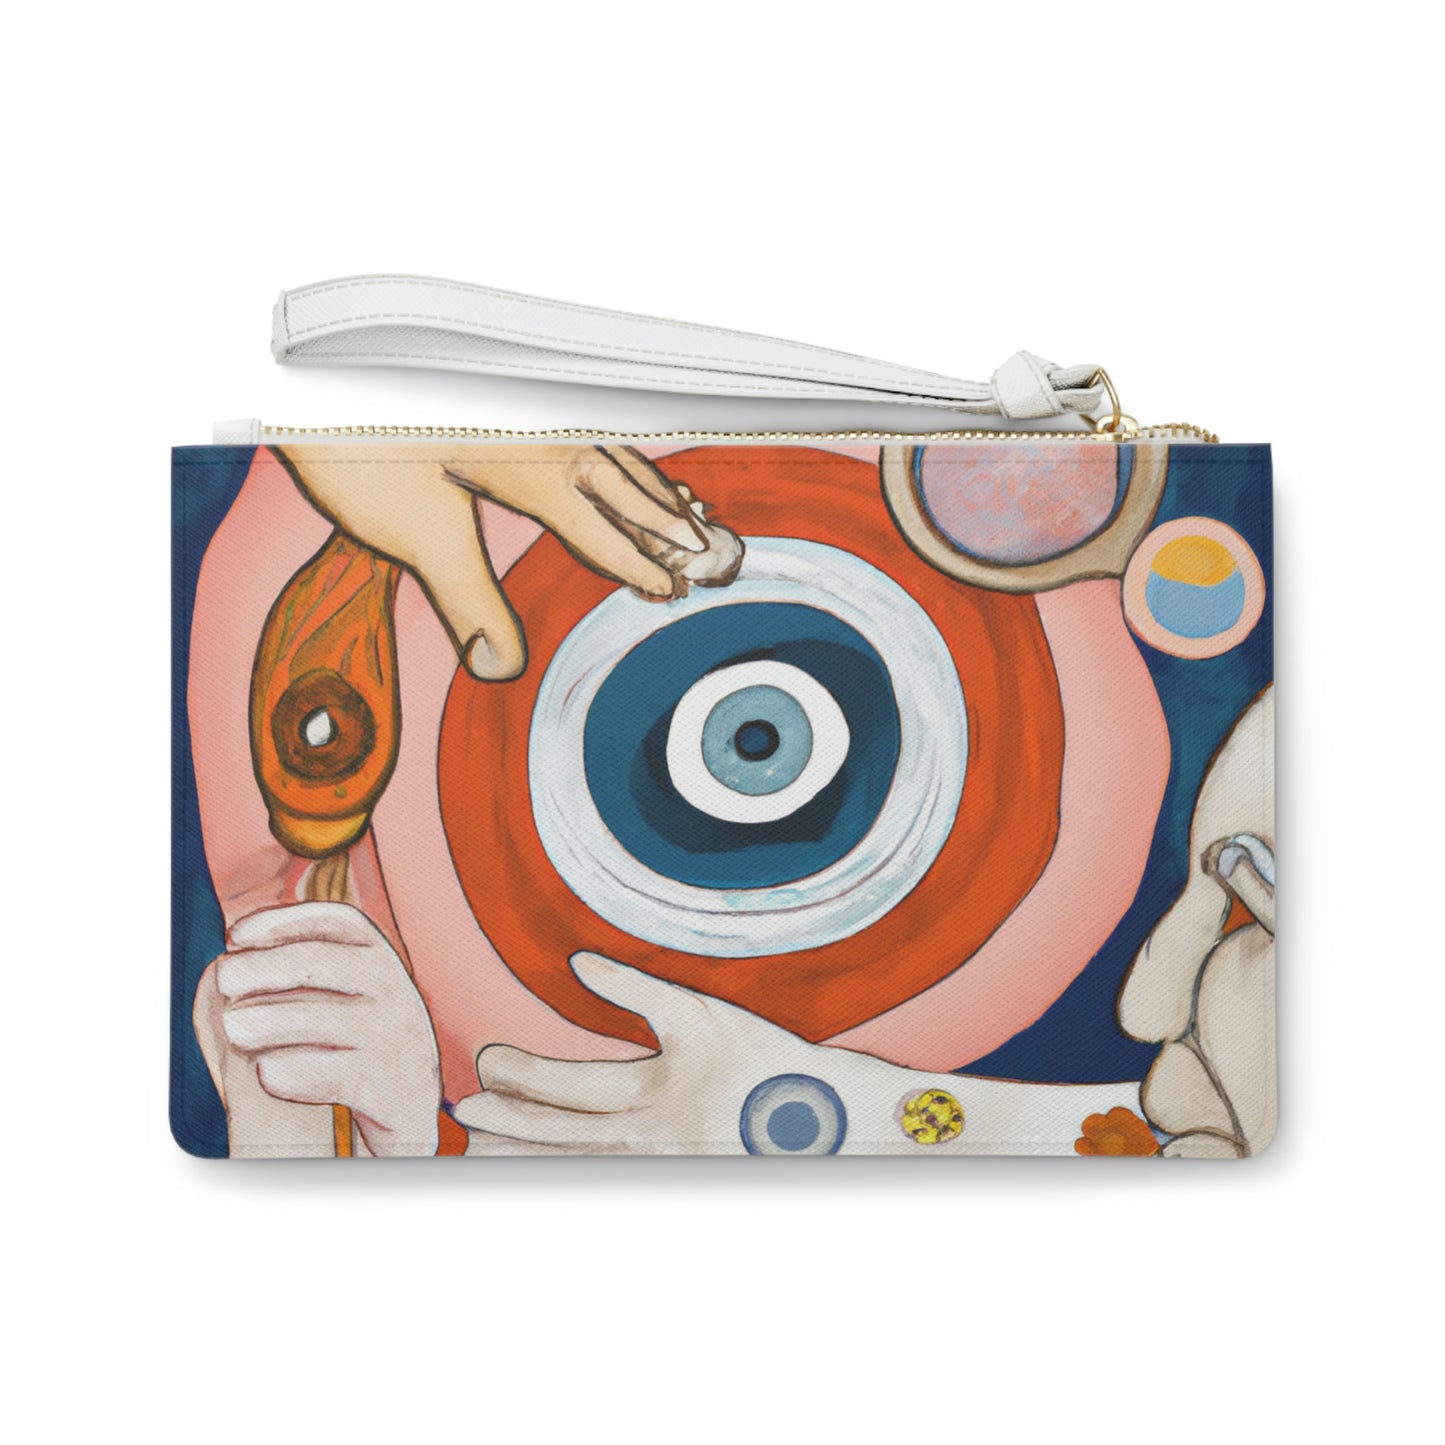 takes them on an adventure

A Twist of Magic: An Elderly Person's Unexpected Journey - The Alien Clutch Bag